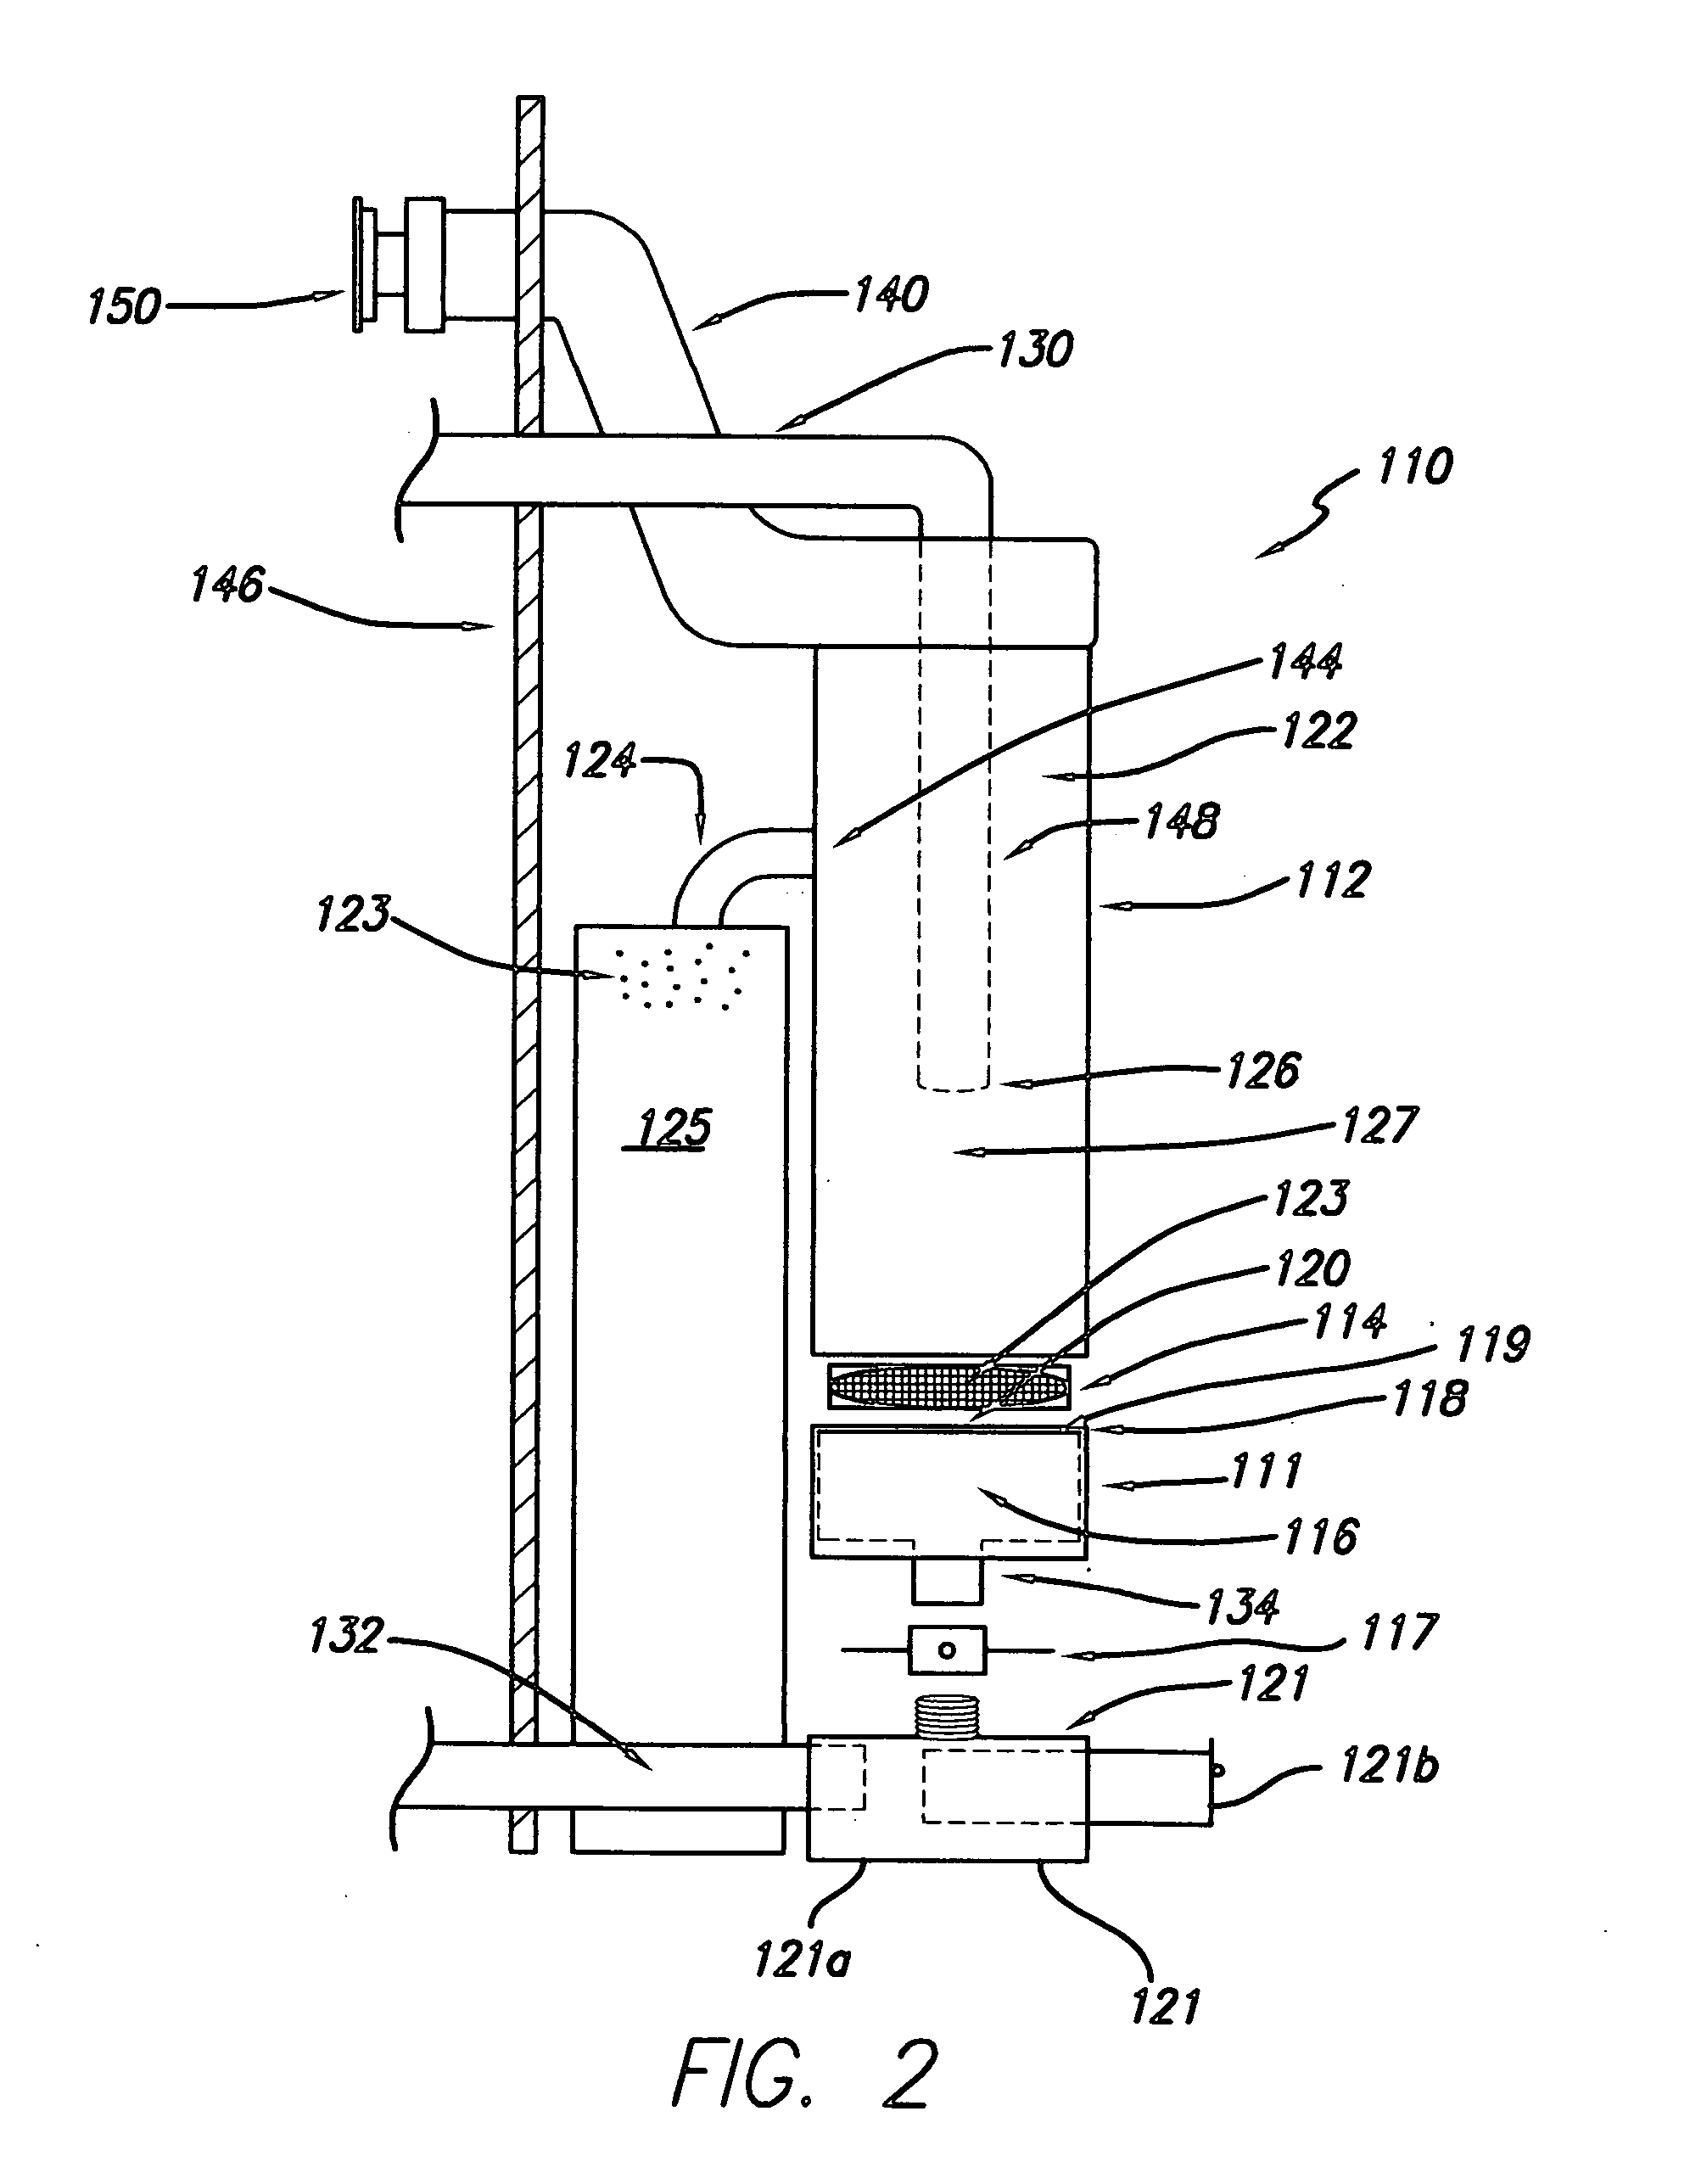 Biomass pellet fuel heating device, system and method